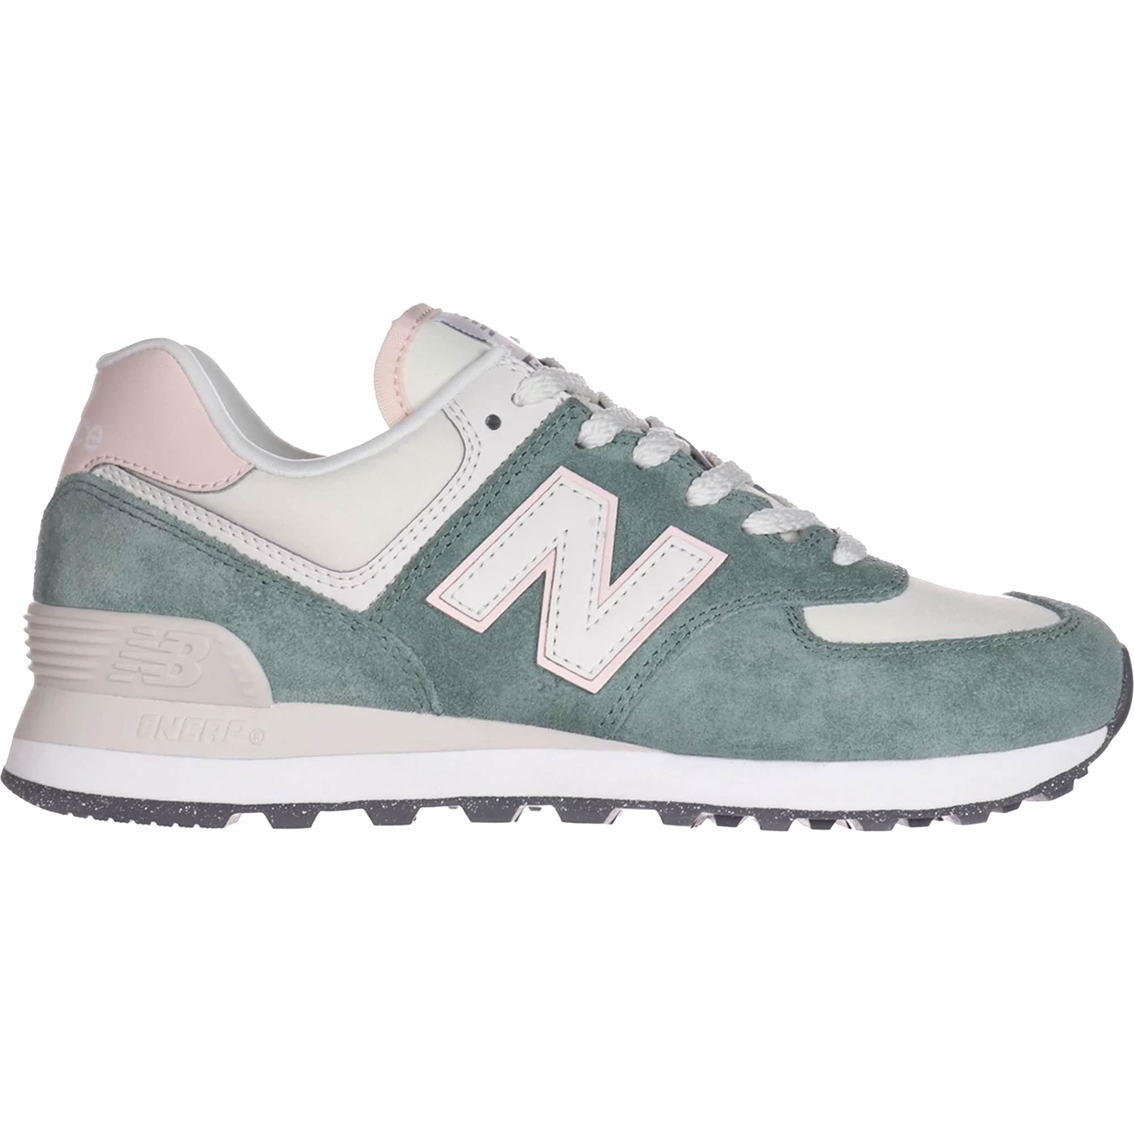 New Balance Women's 574 Sneakers - Image 2 of 3